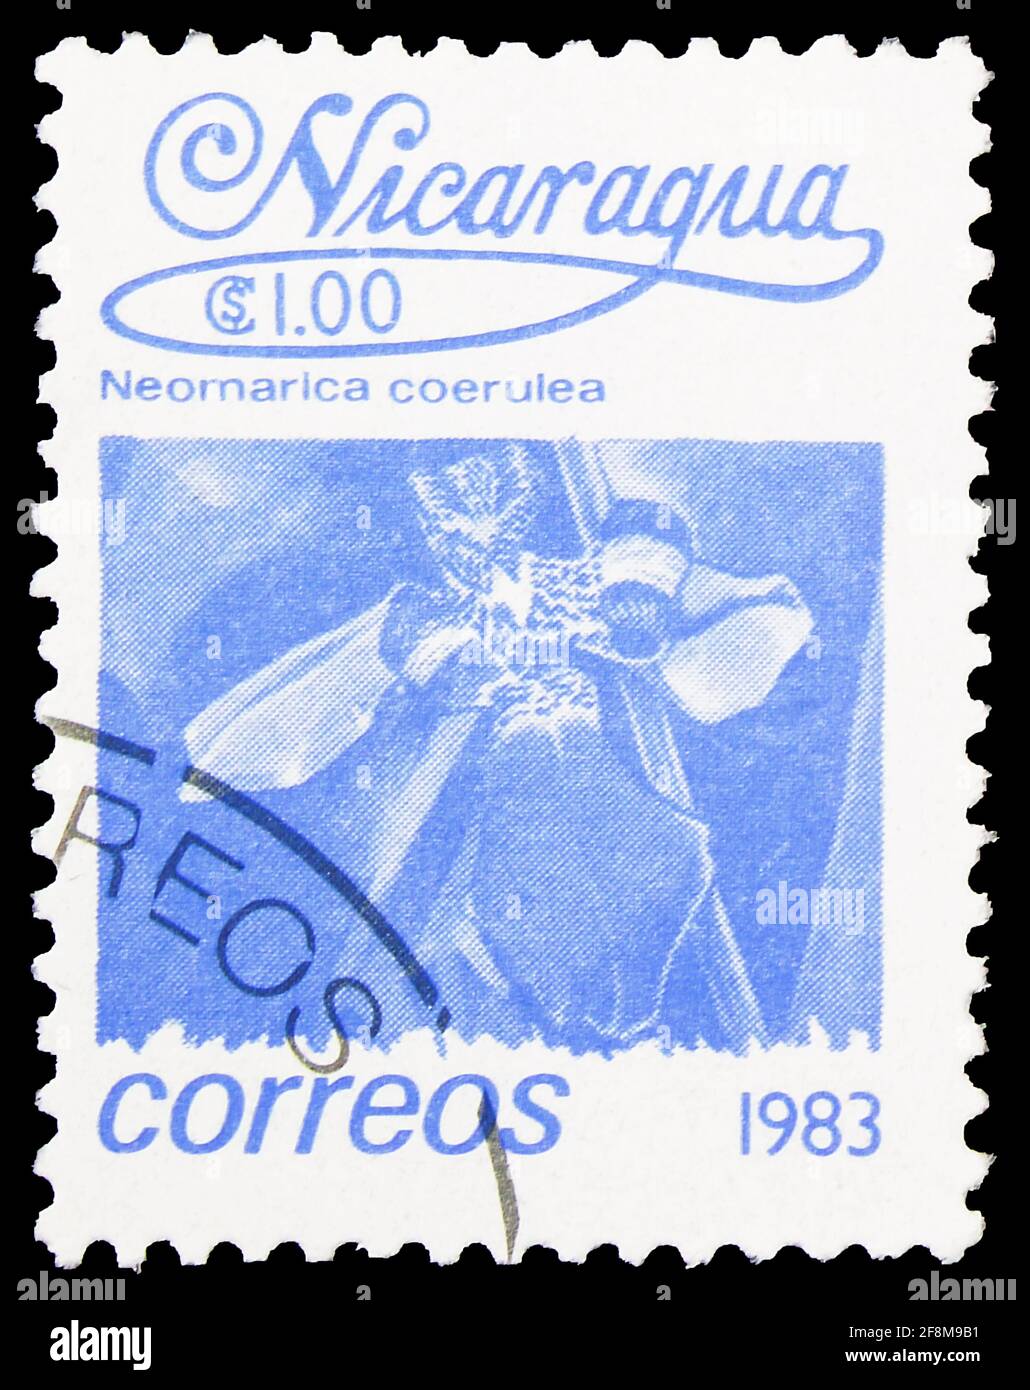 MOSCOW, RUSSIA - SEPTEMBER 30, 2019: Postage stamp printed in Nicaragua shows Neomarica coerulea, Local Flowers serie, circa 1983 Stock Photo